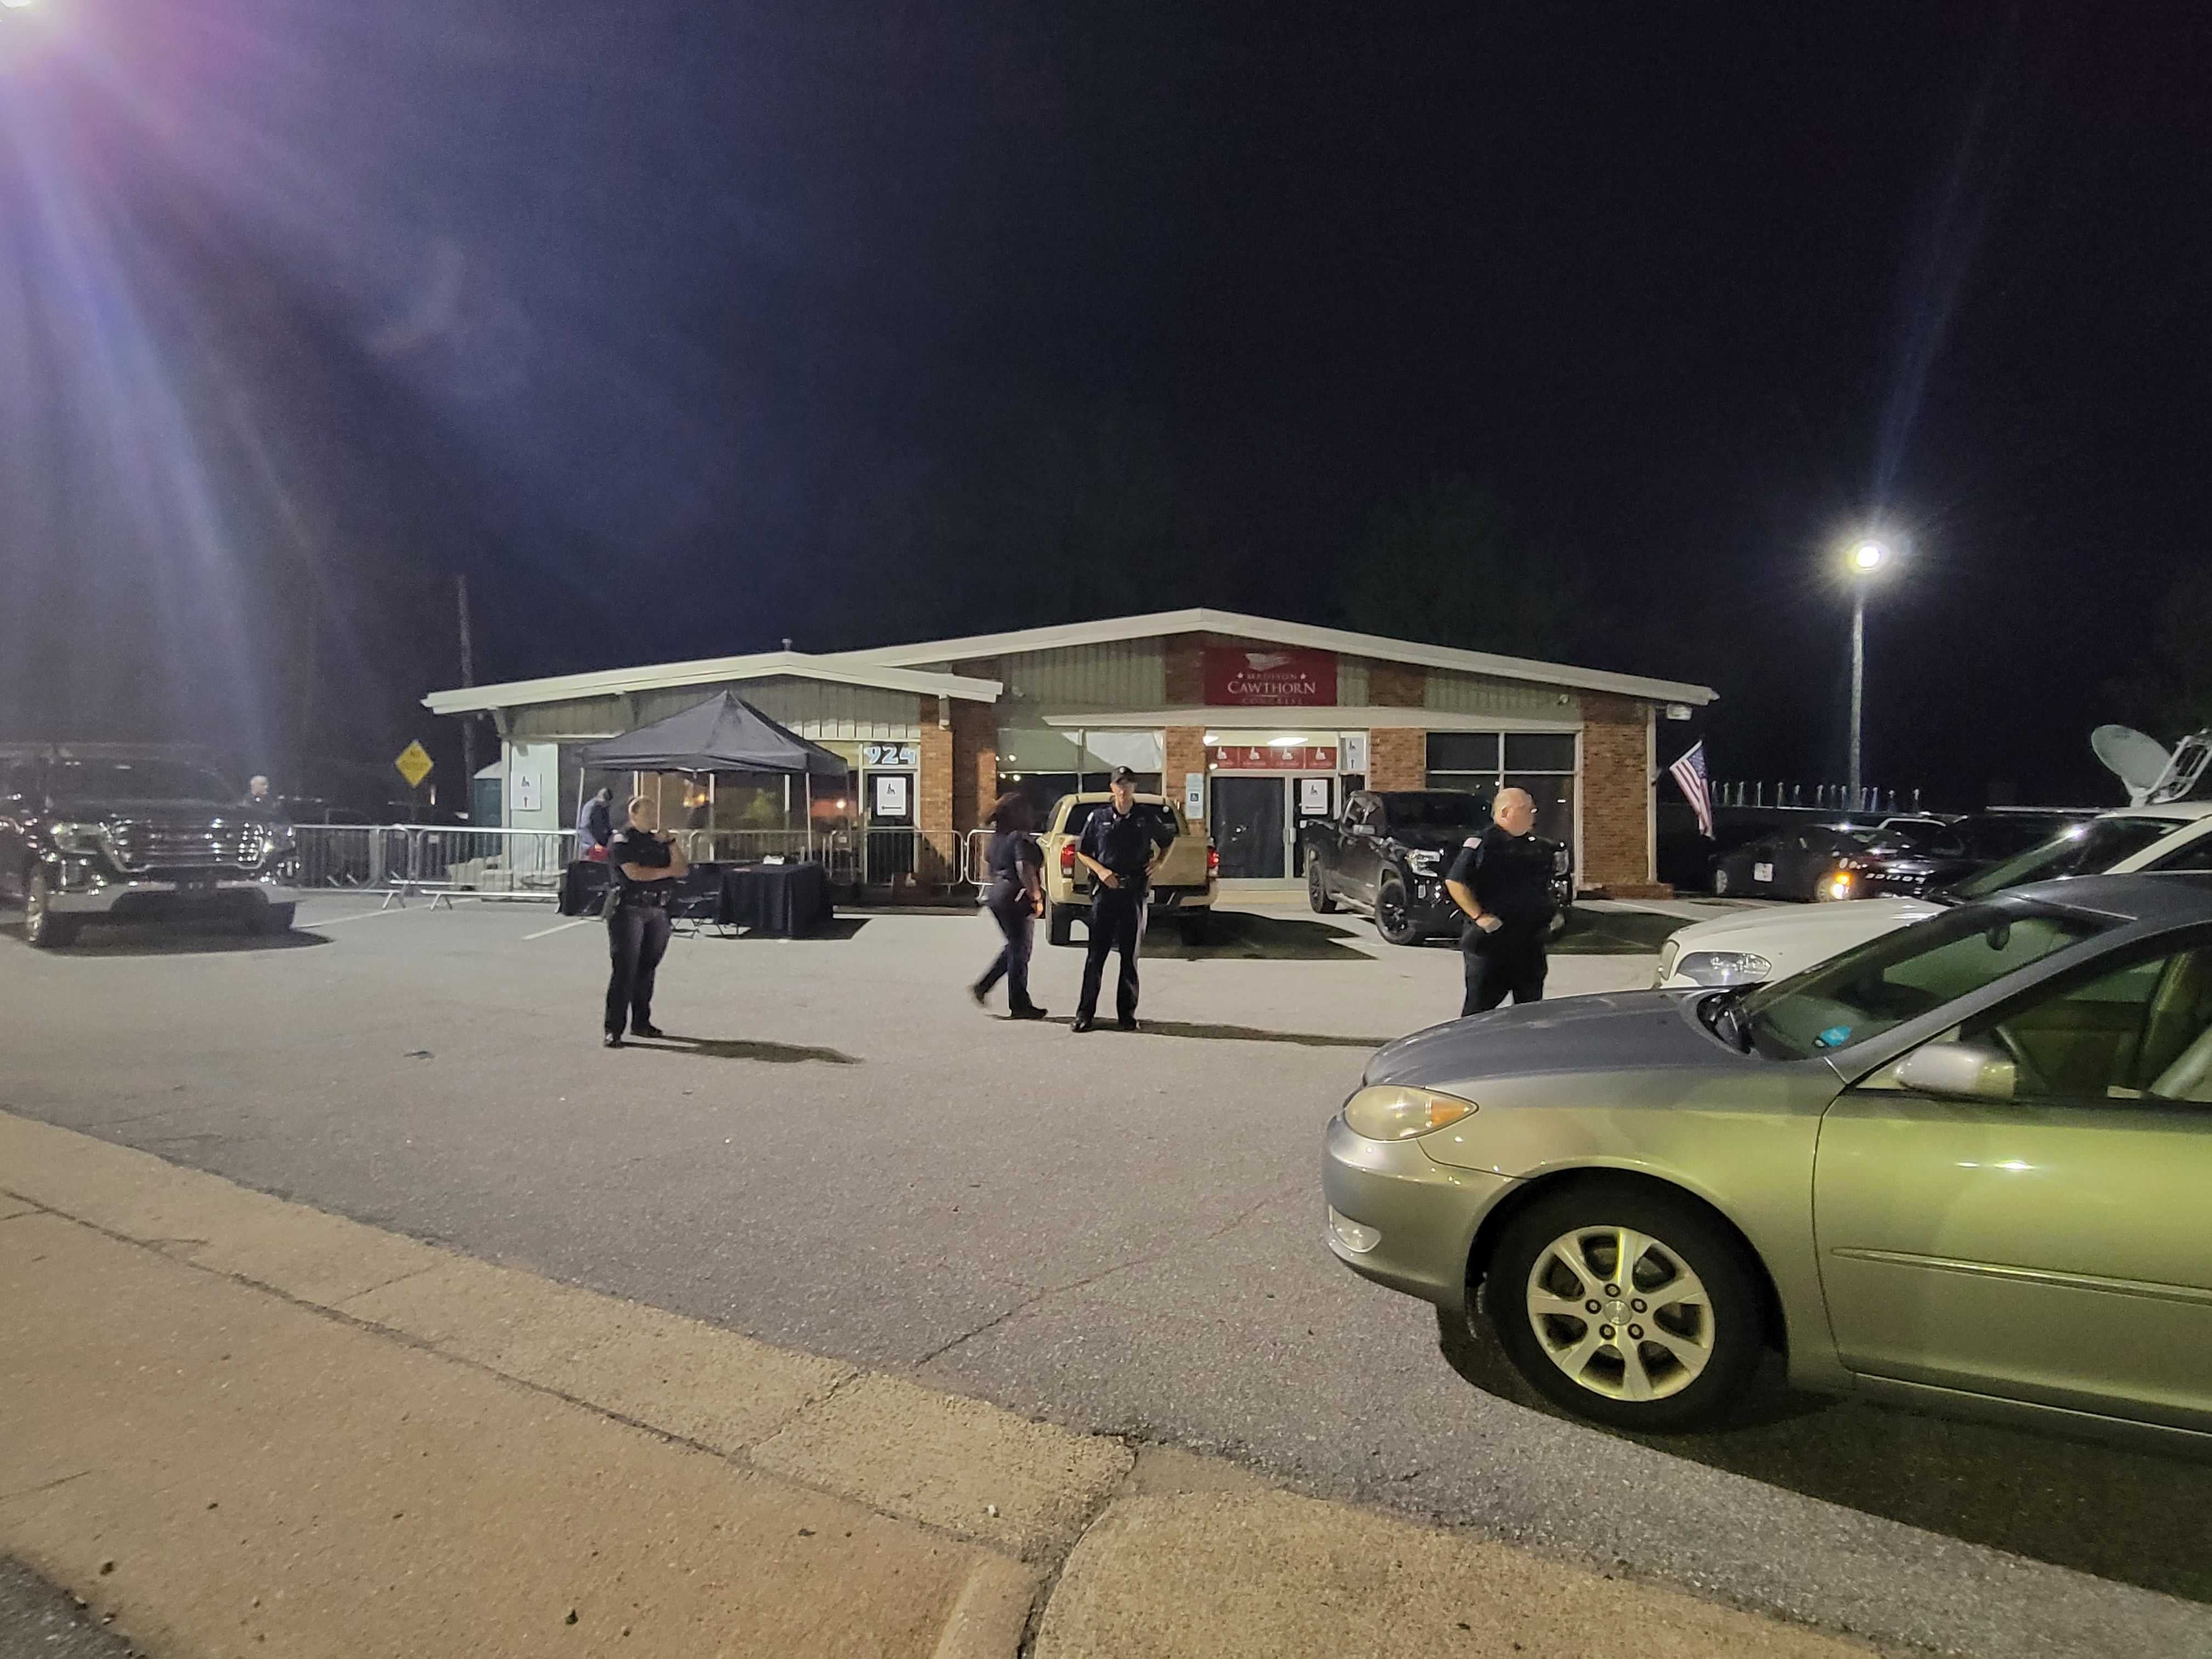 Several members of the Hendersonville police department forced The Independent off the premises